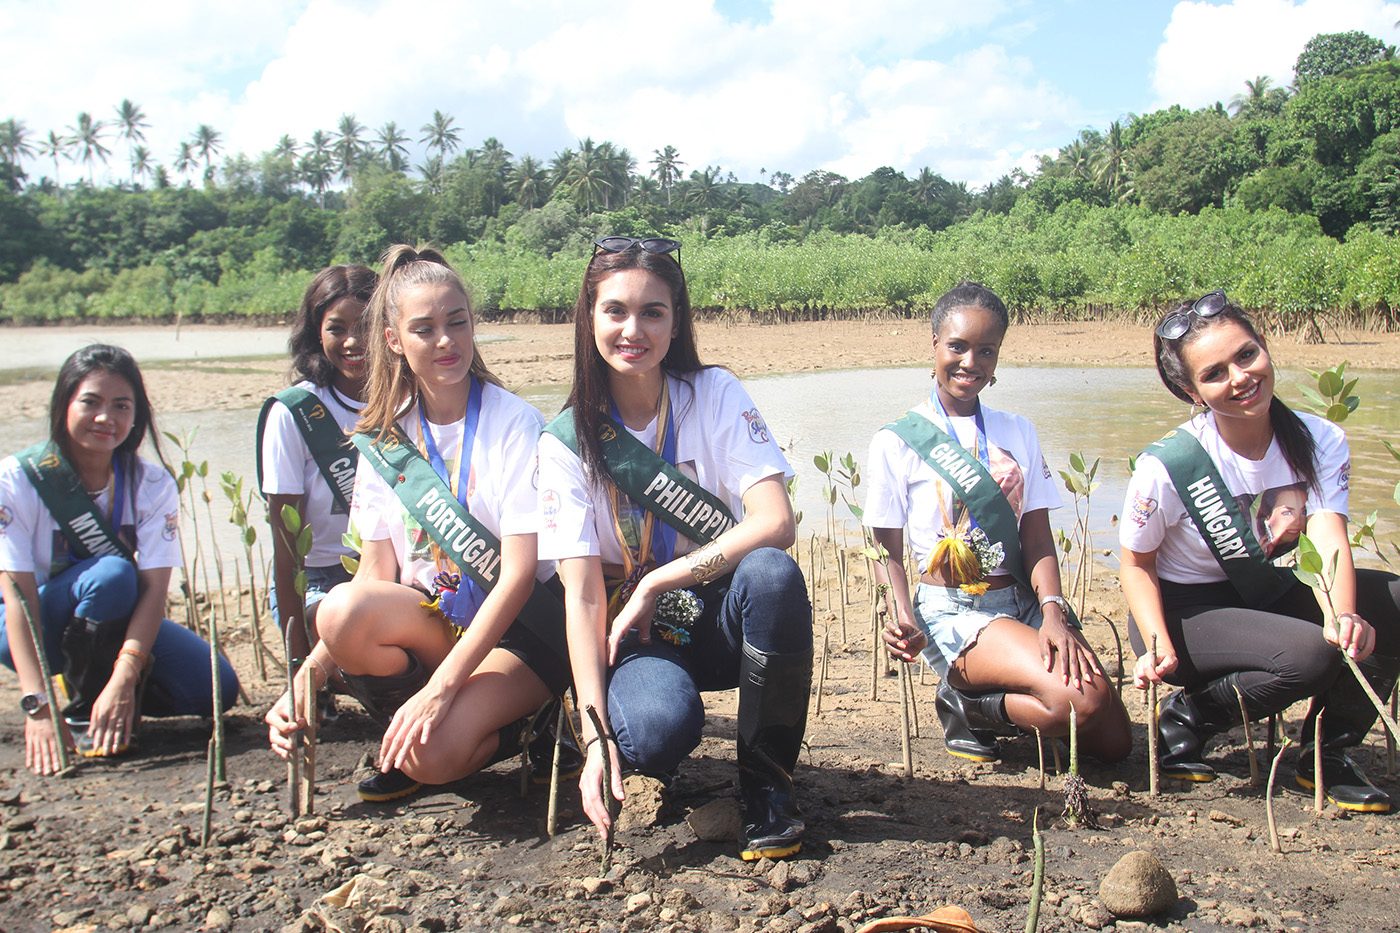 DOWN AND DIRTY. Celeste Cortesi and the candidates get serious in planting the mangrove seedlings.  